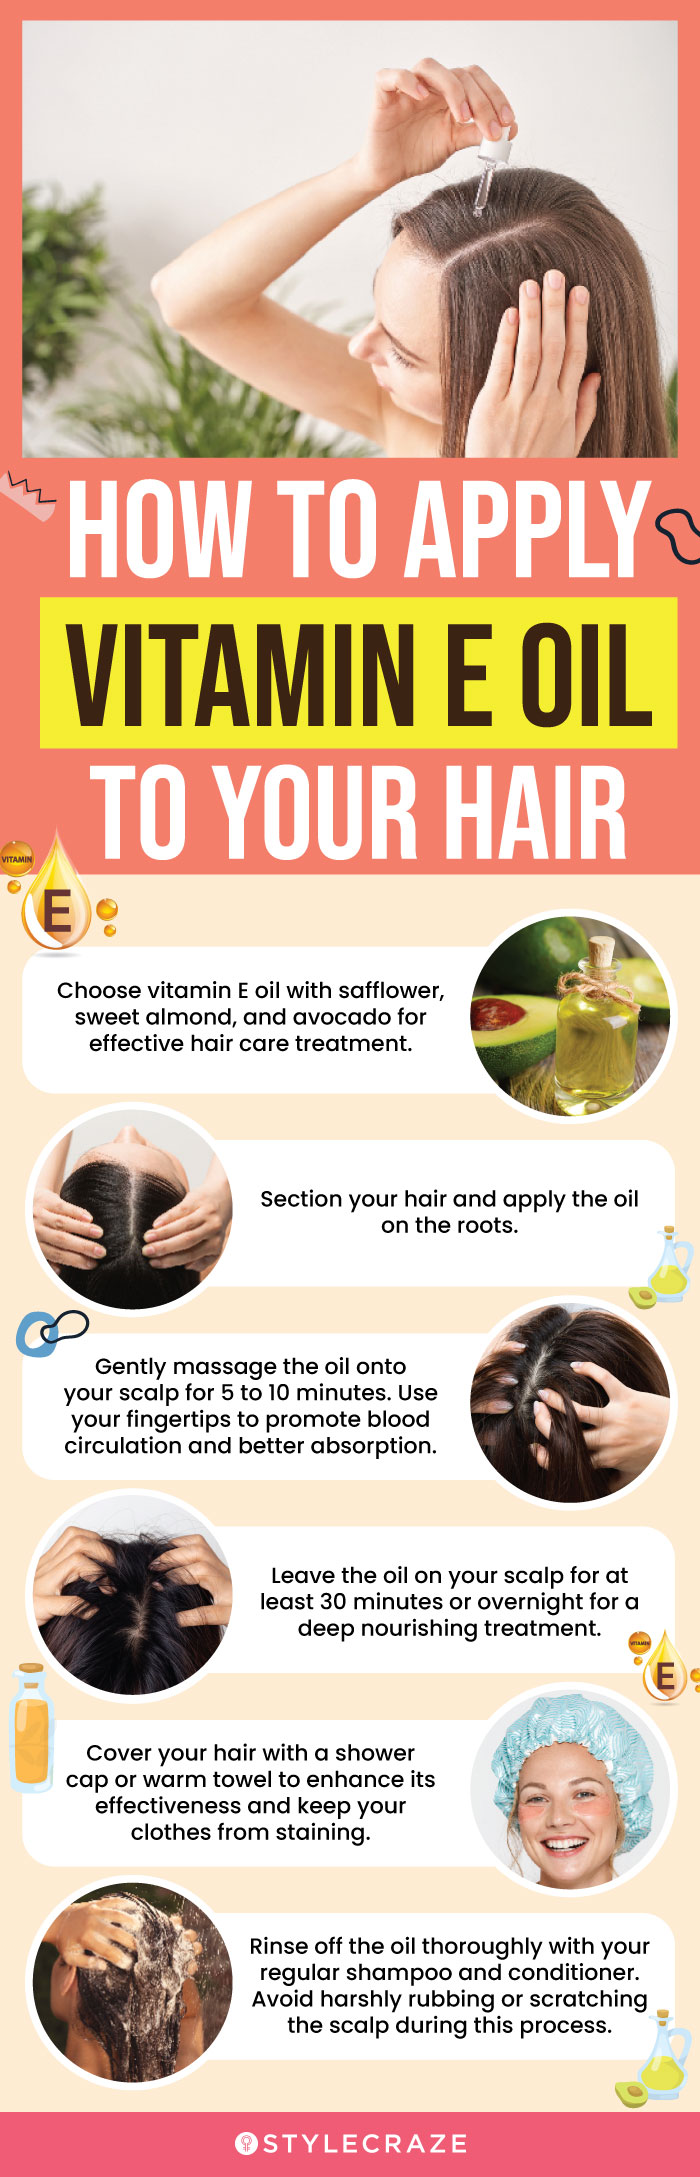 How To Apply Vitamin E Oil To Your Hair (infographic)